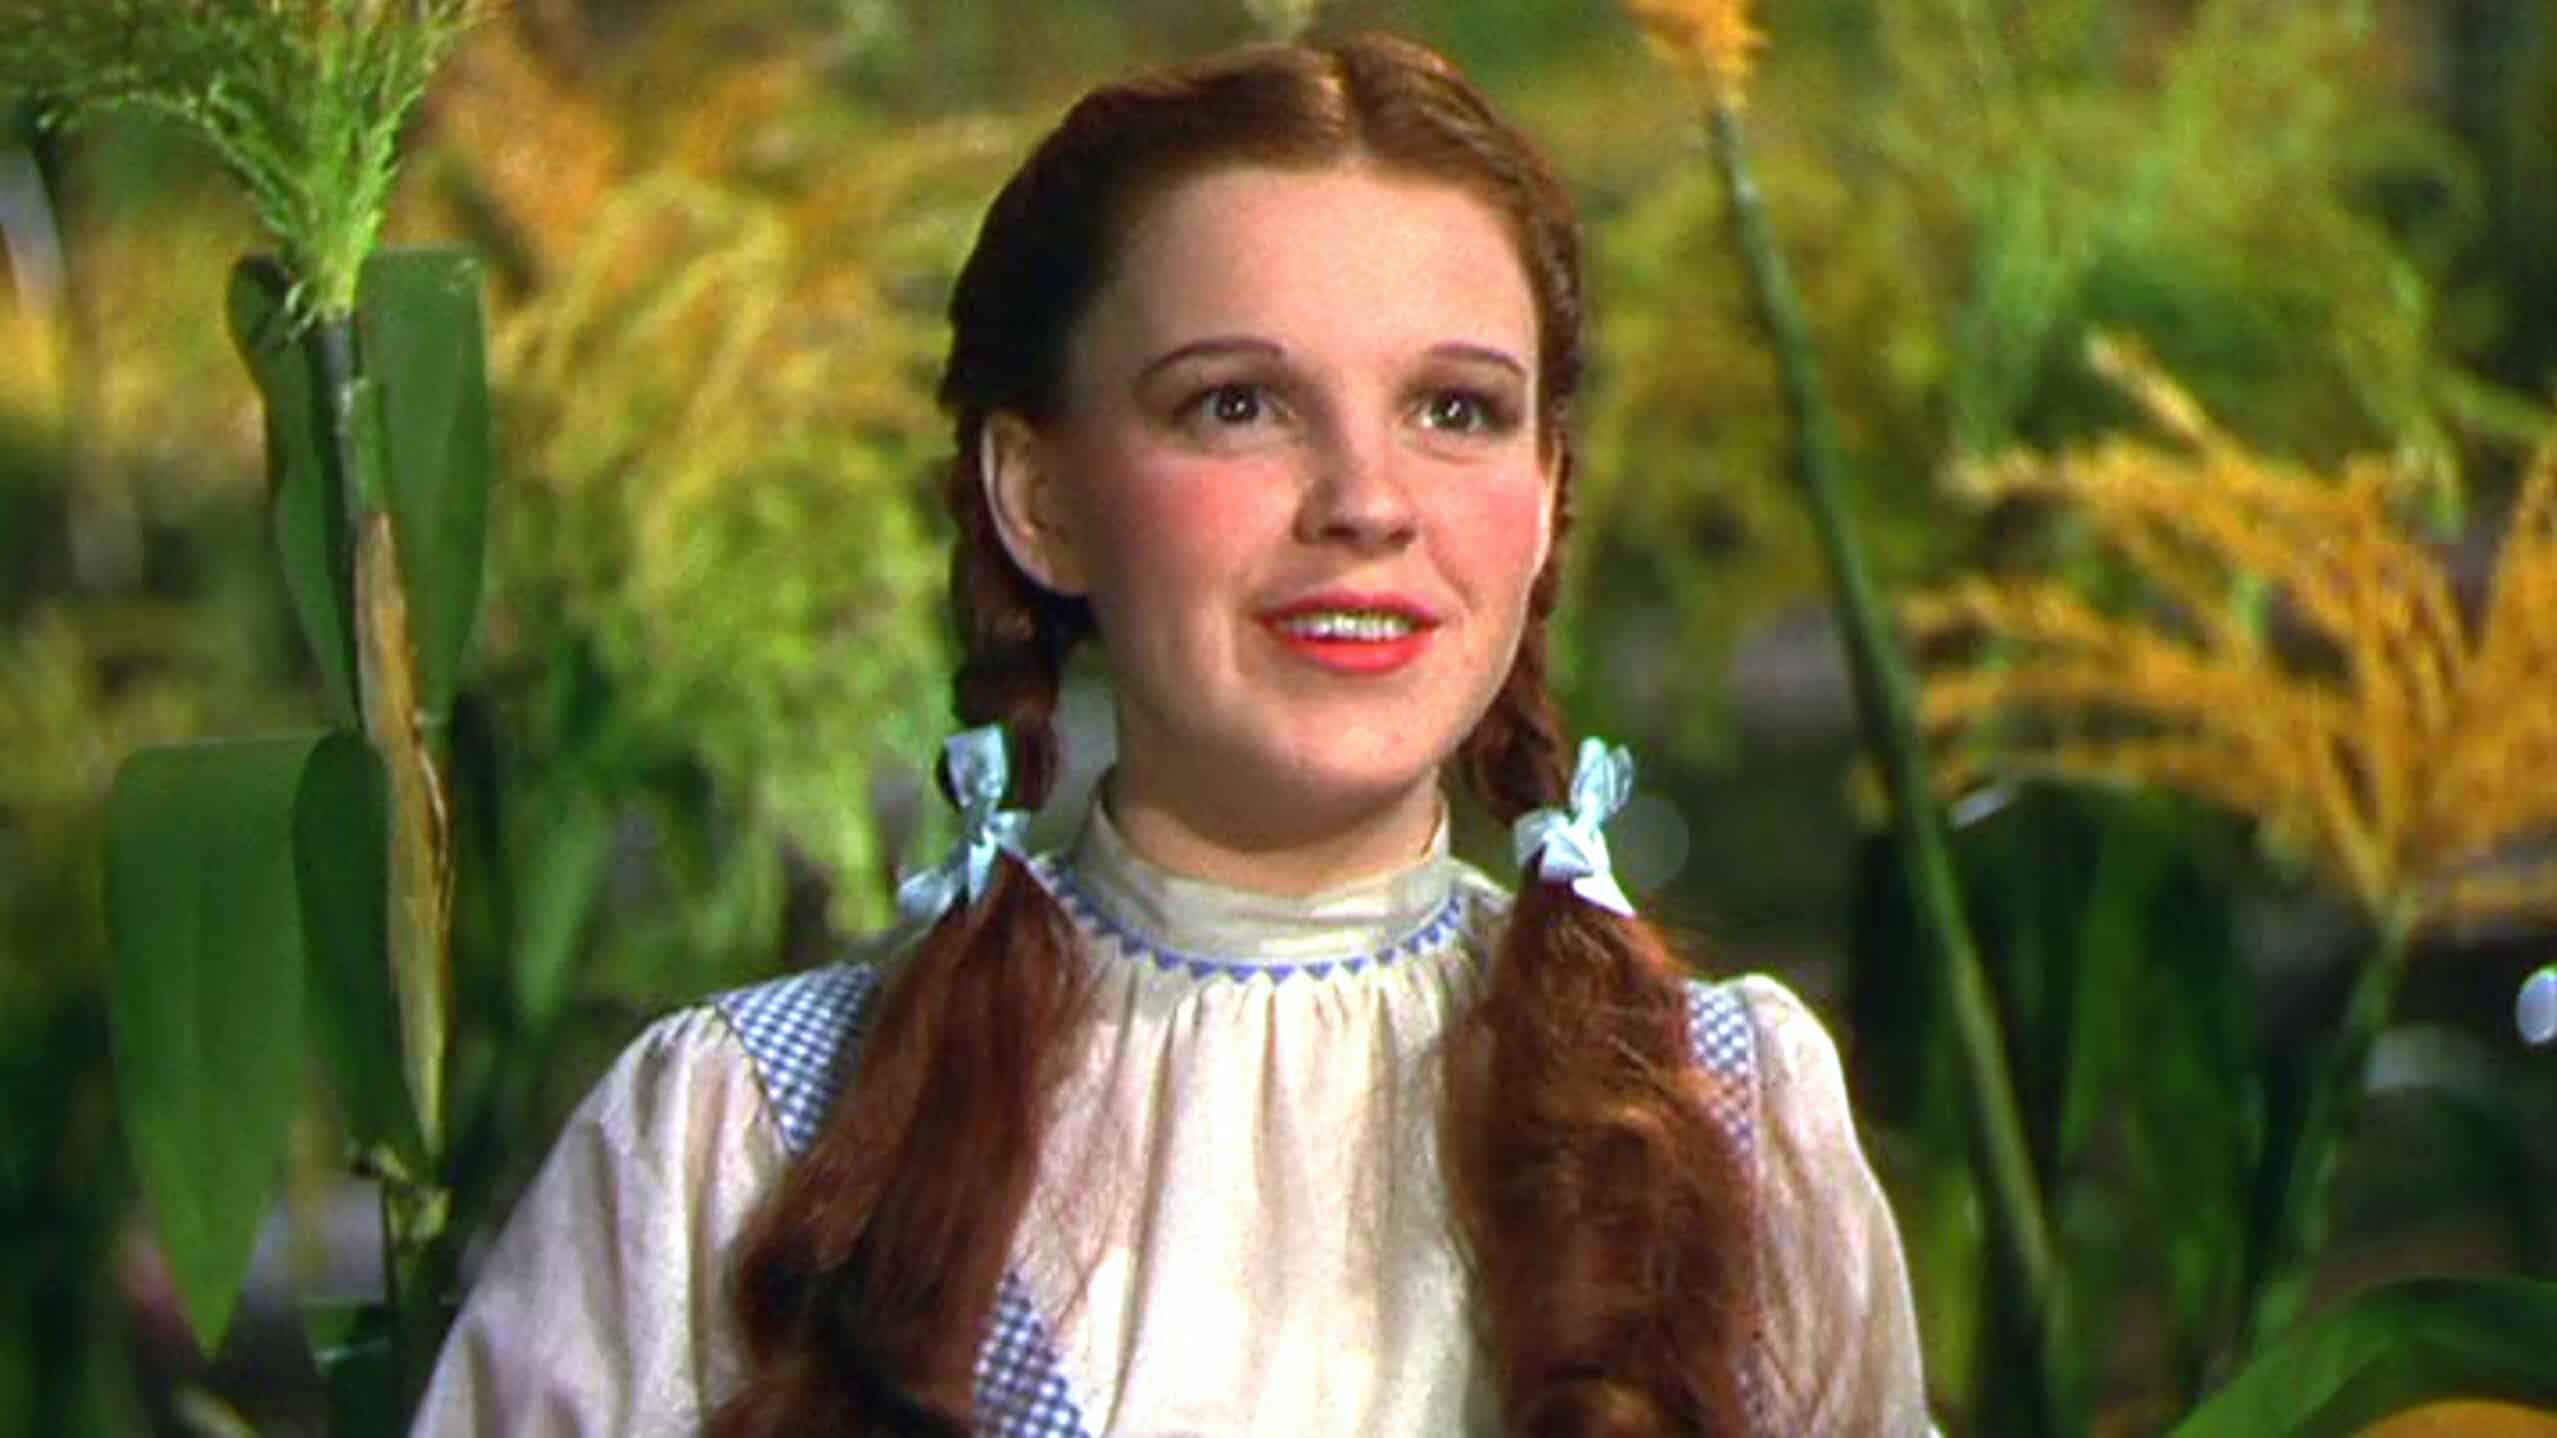 Judy Garland stars in the classic film The Wizard of Oz. Press image courtesy of the Mahaiwe.